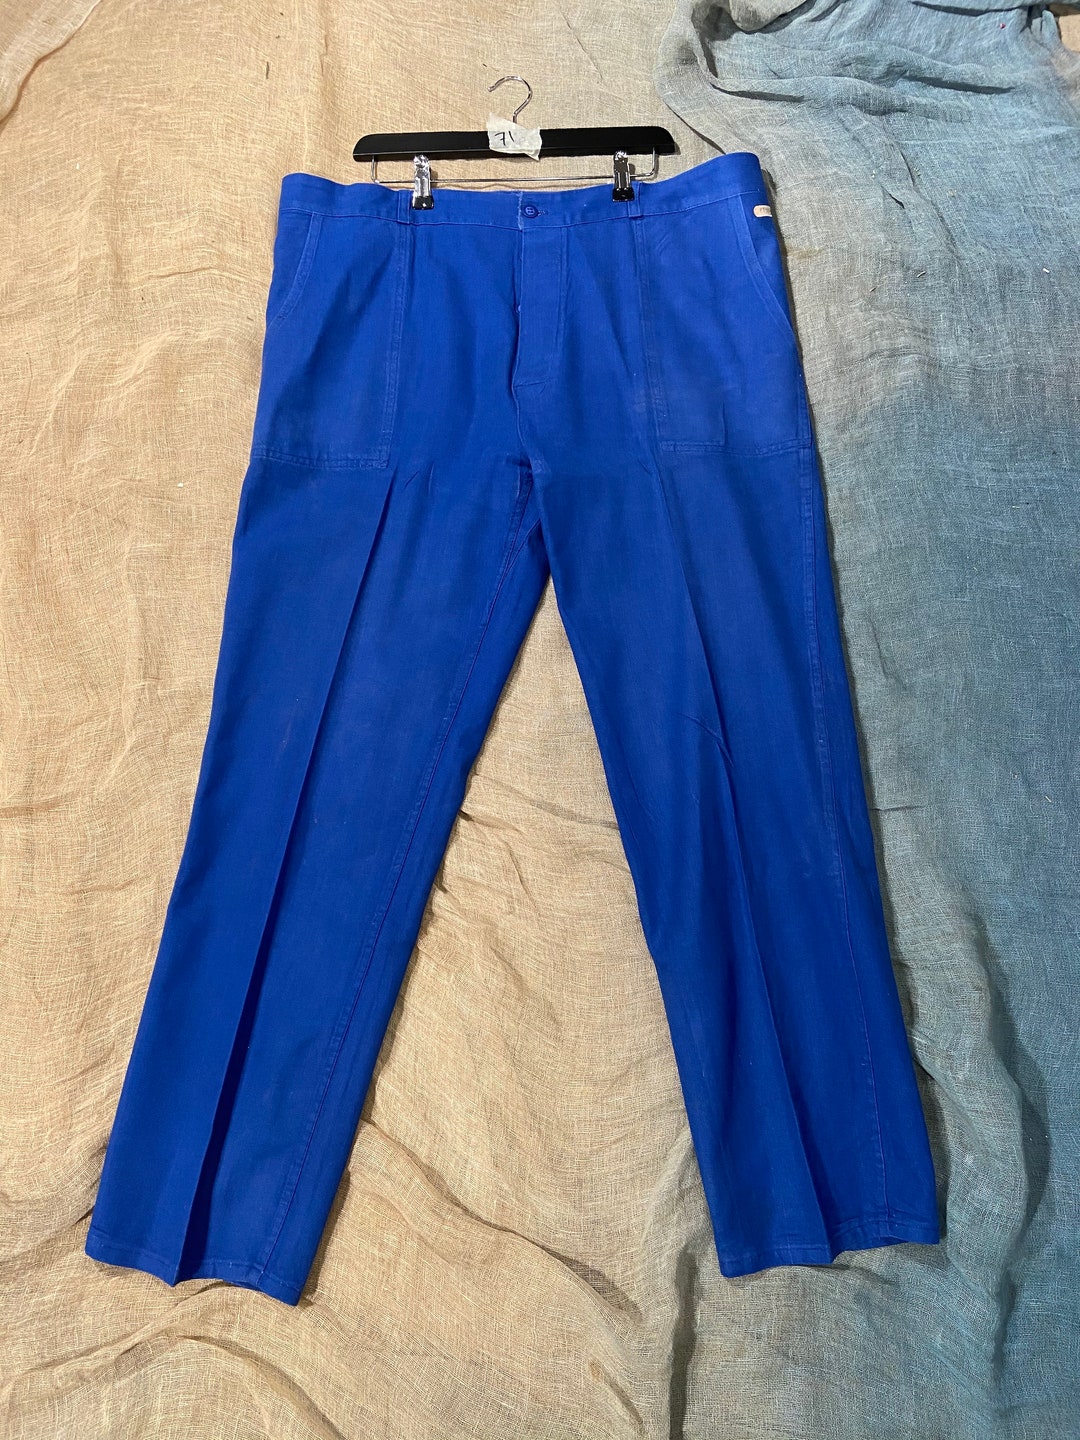 Electric Blue Workwear Trousers - Etsy